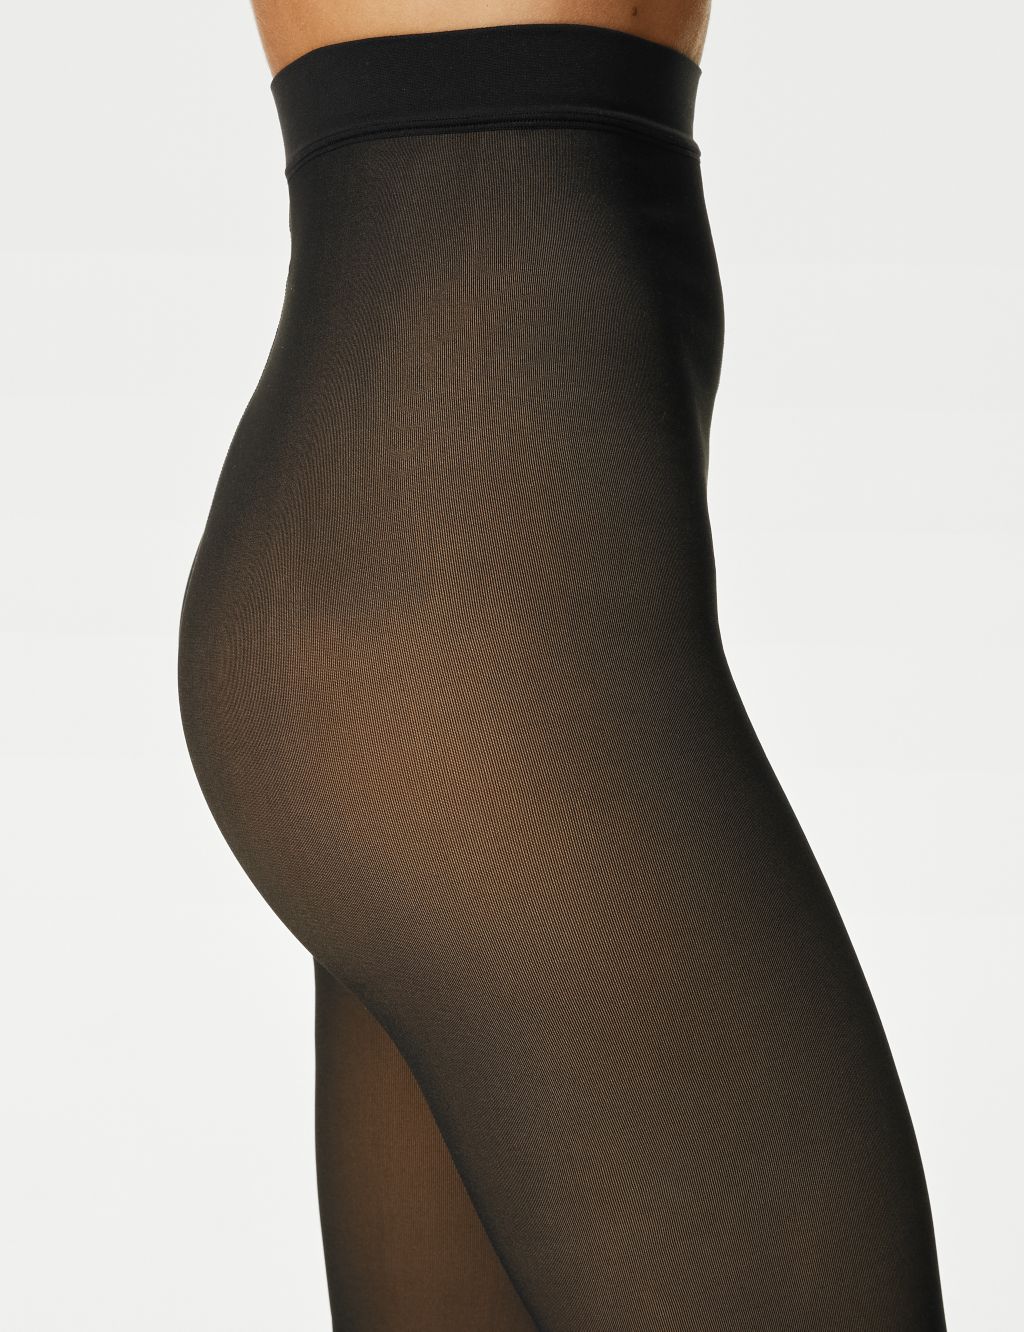 M&S Collection 200 Denier Thermal Fleece Lined Tights - ShopStyle Hosiery